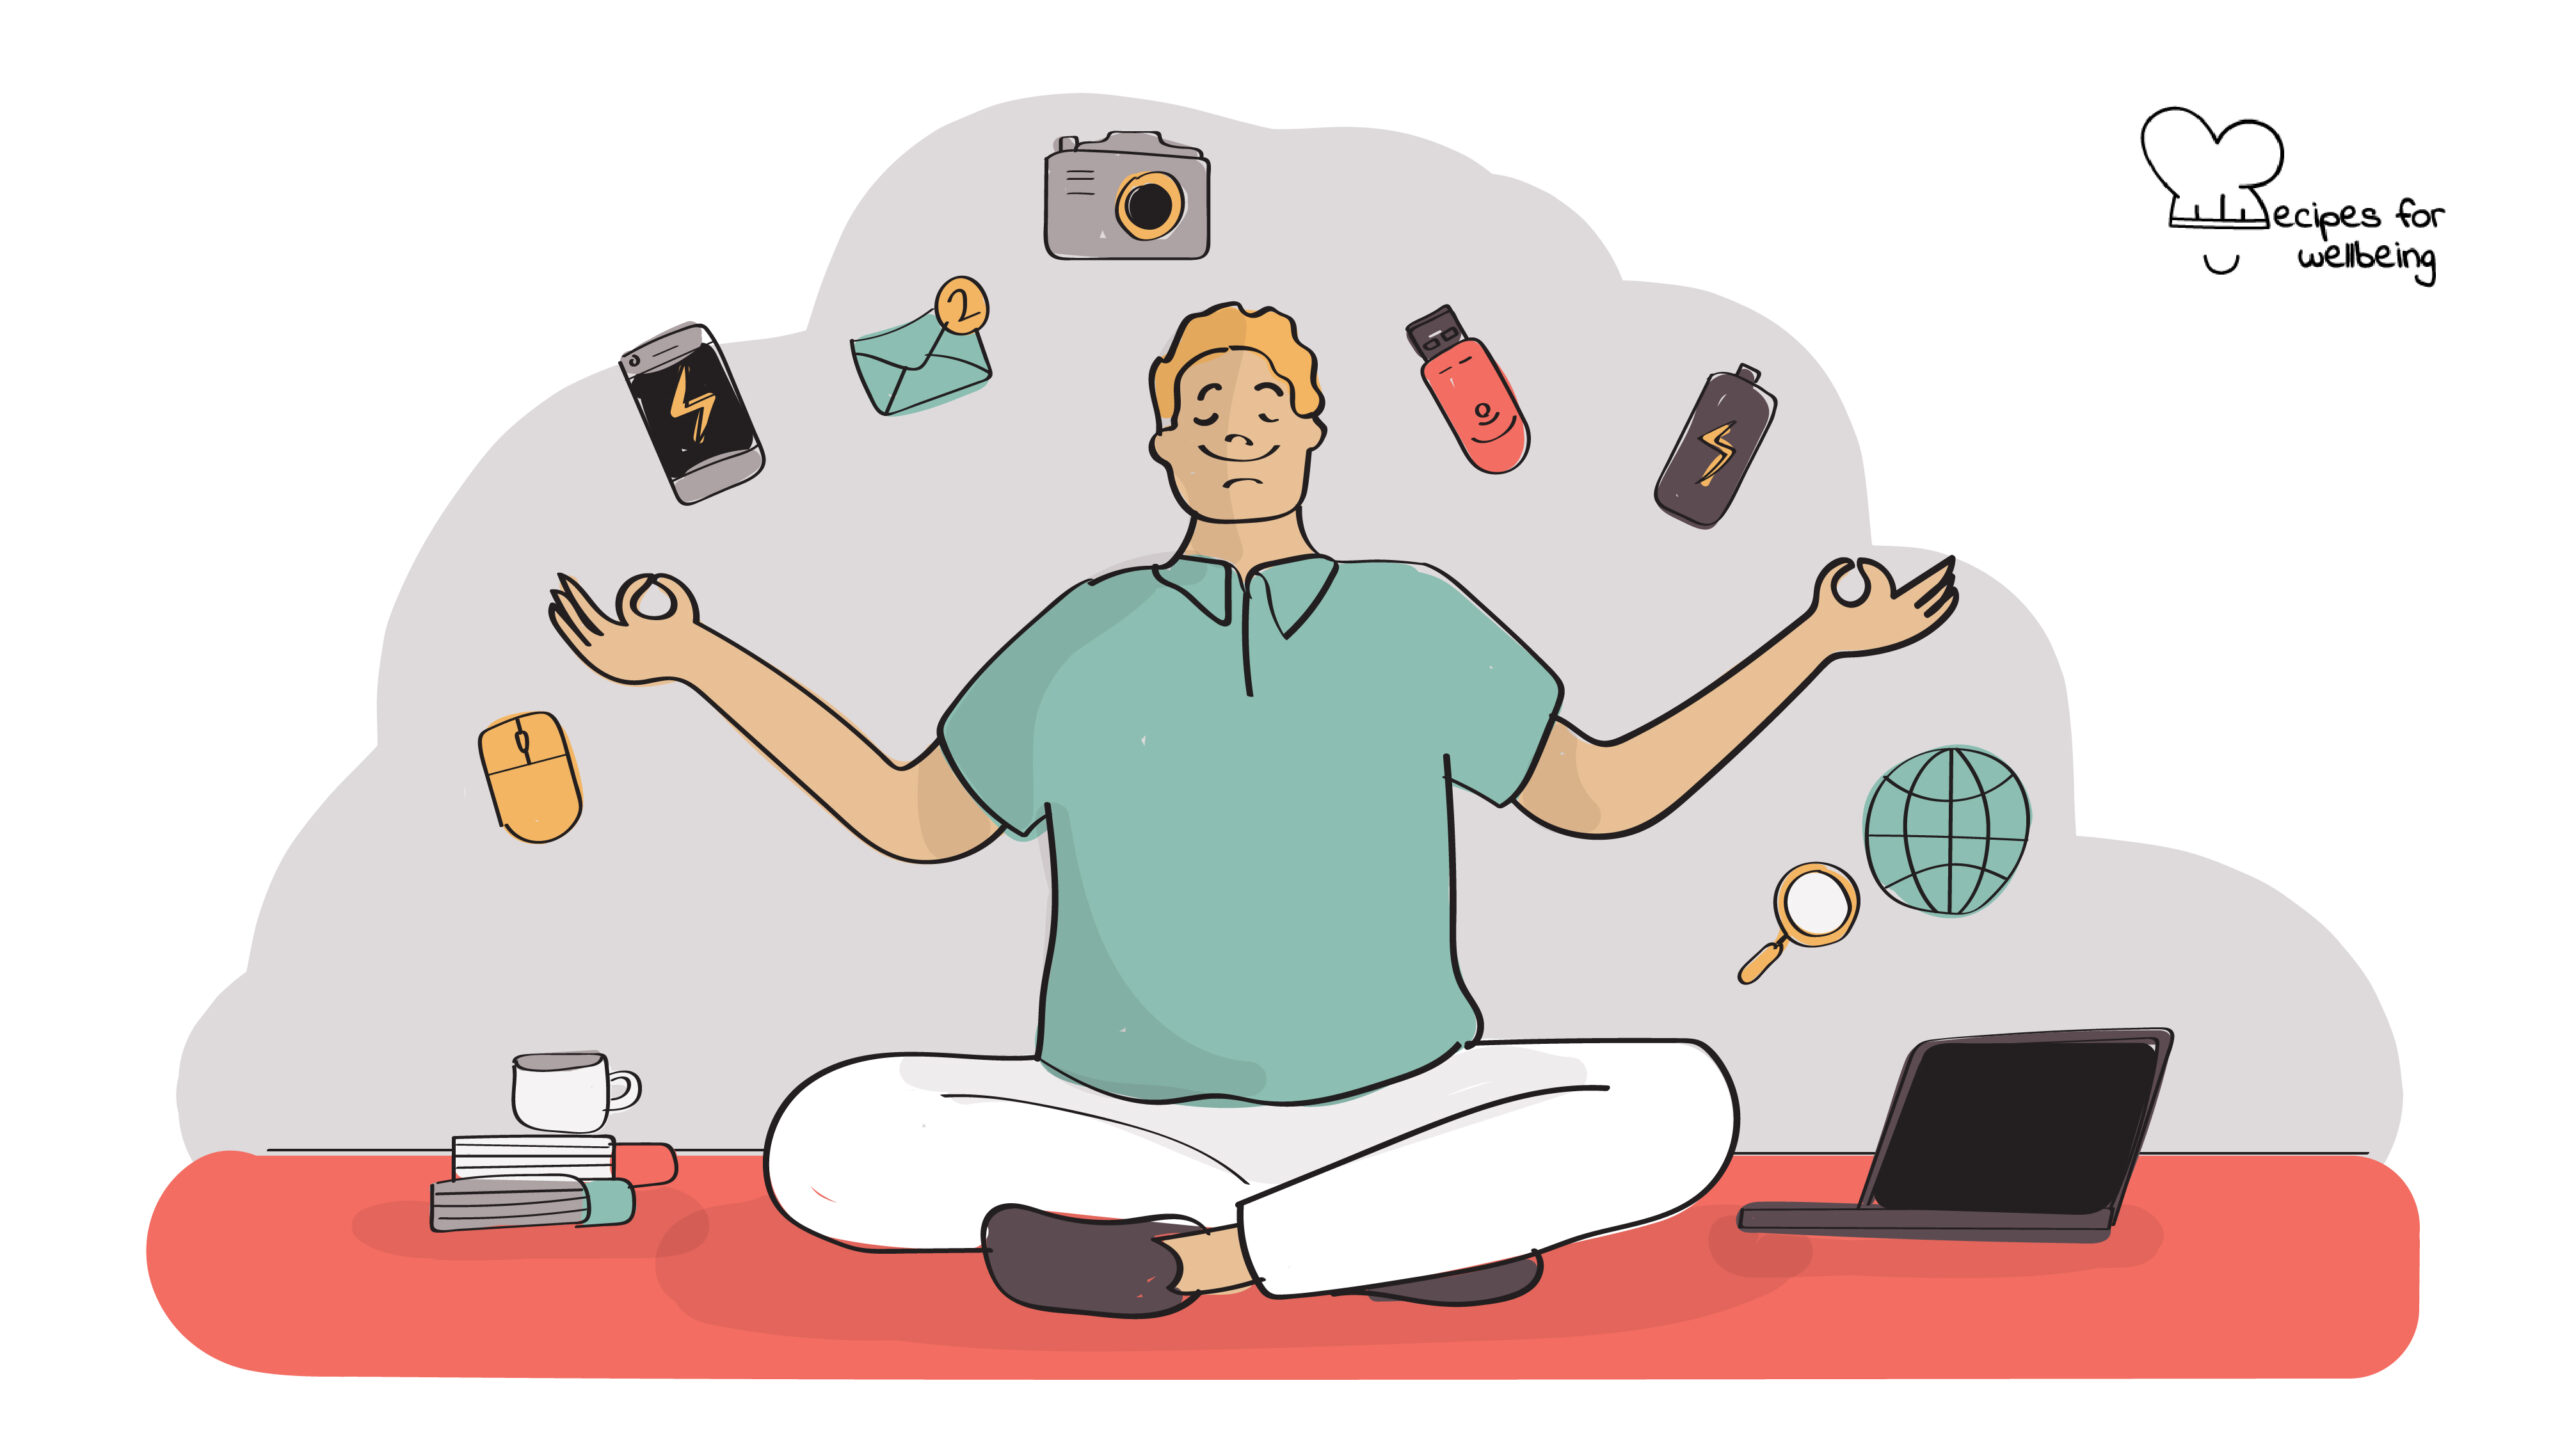 Illustration of person sitting cross-legged in a meditative state with tech items surrounding them. © Recipes for Wellbeing